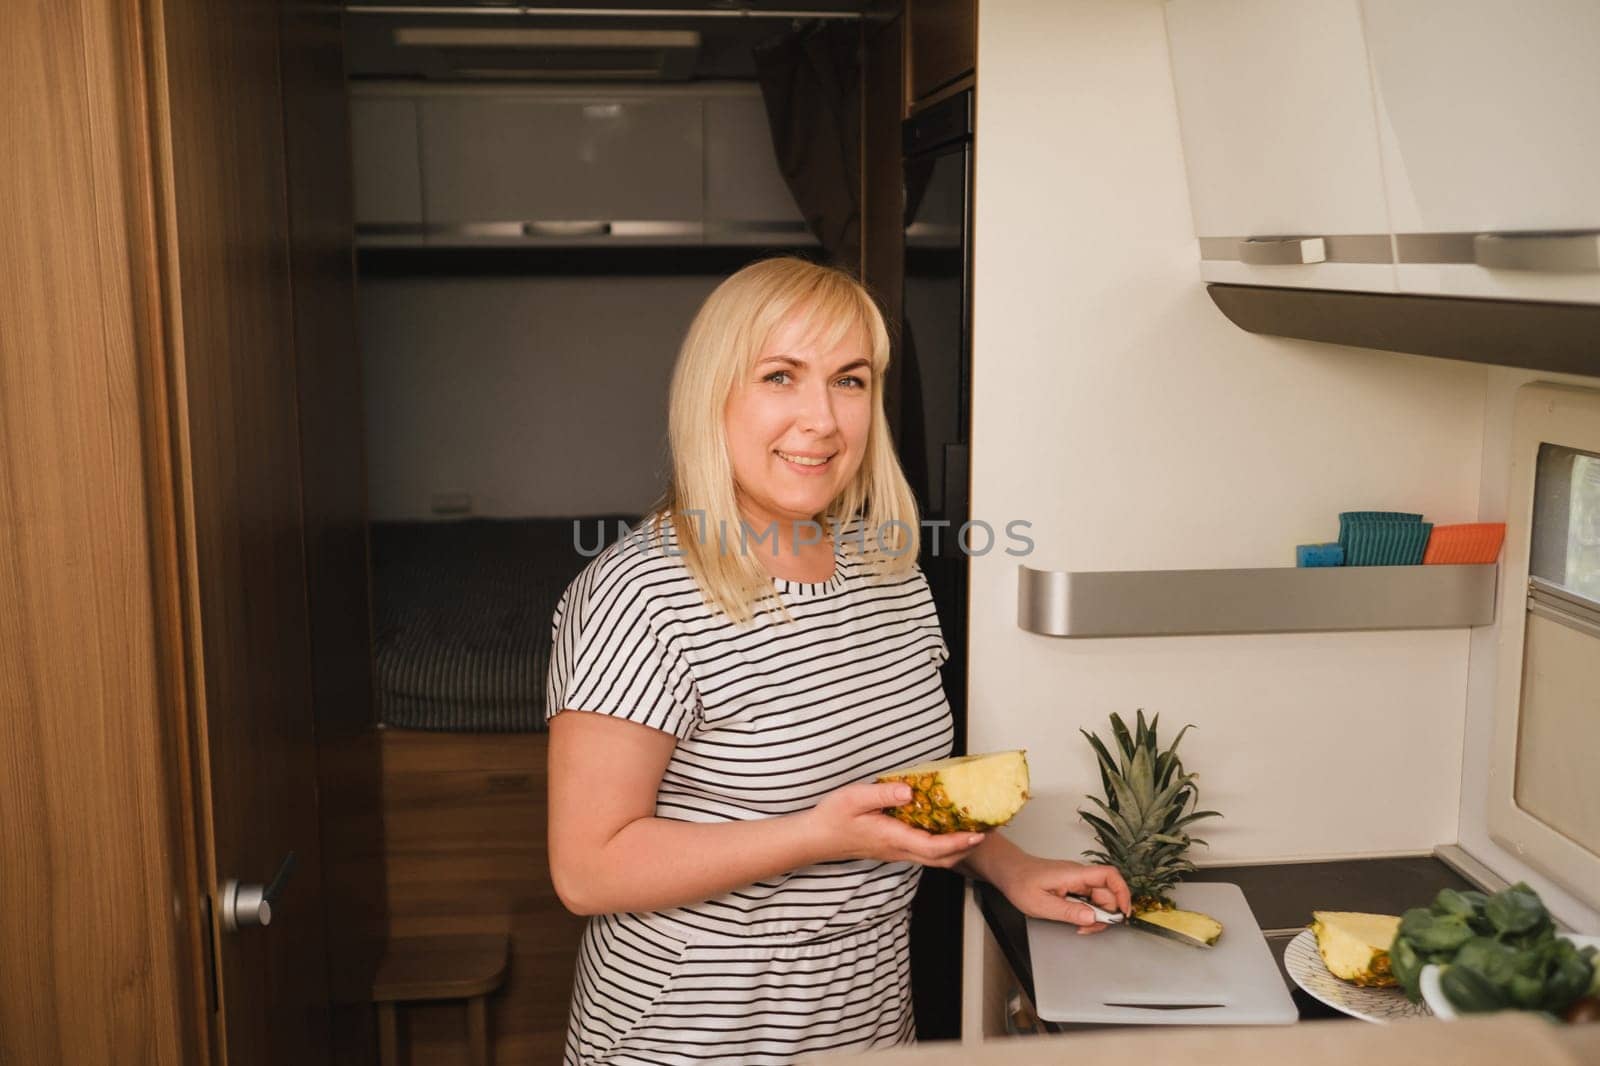 a woman cooking food in the kitchen inside a motorhome, the interior of a motorhome.